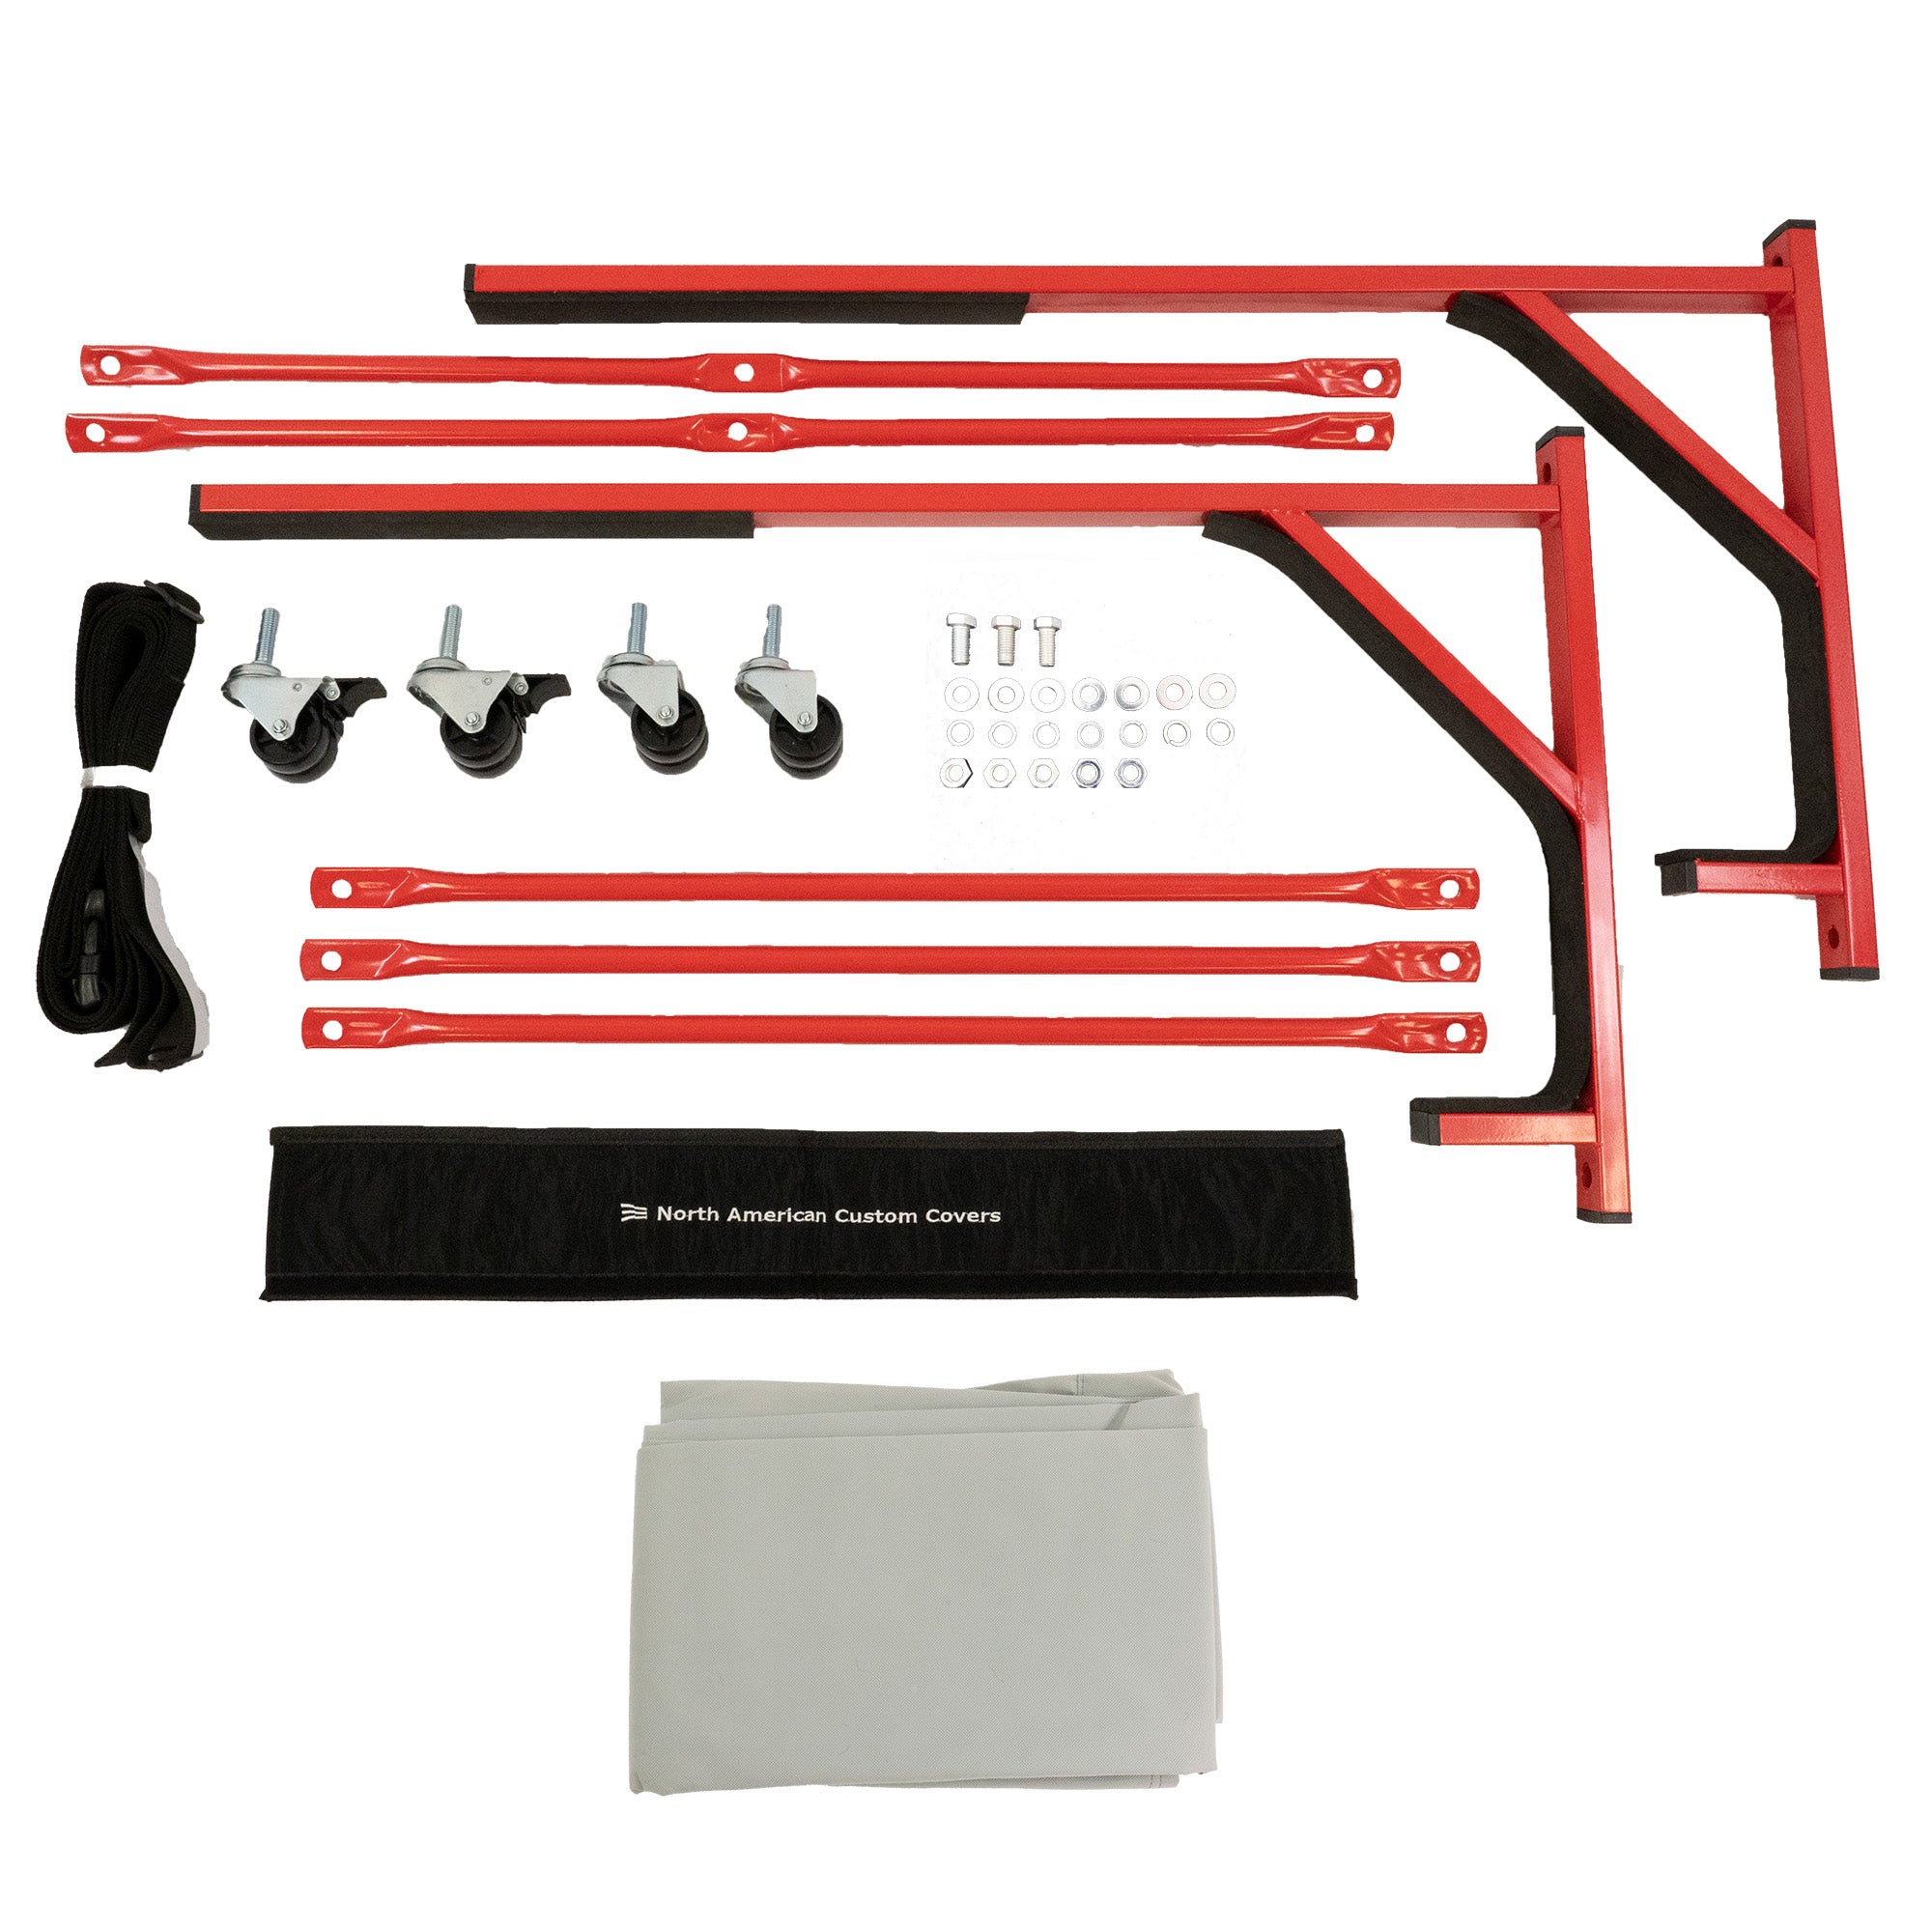 Porsche 911 996 997 Heavy-duty Hardtop Stand Trolley Cart Rack (Red) with Securing Harness and Hard Top Dust Cover (050R)